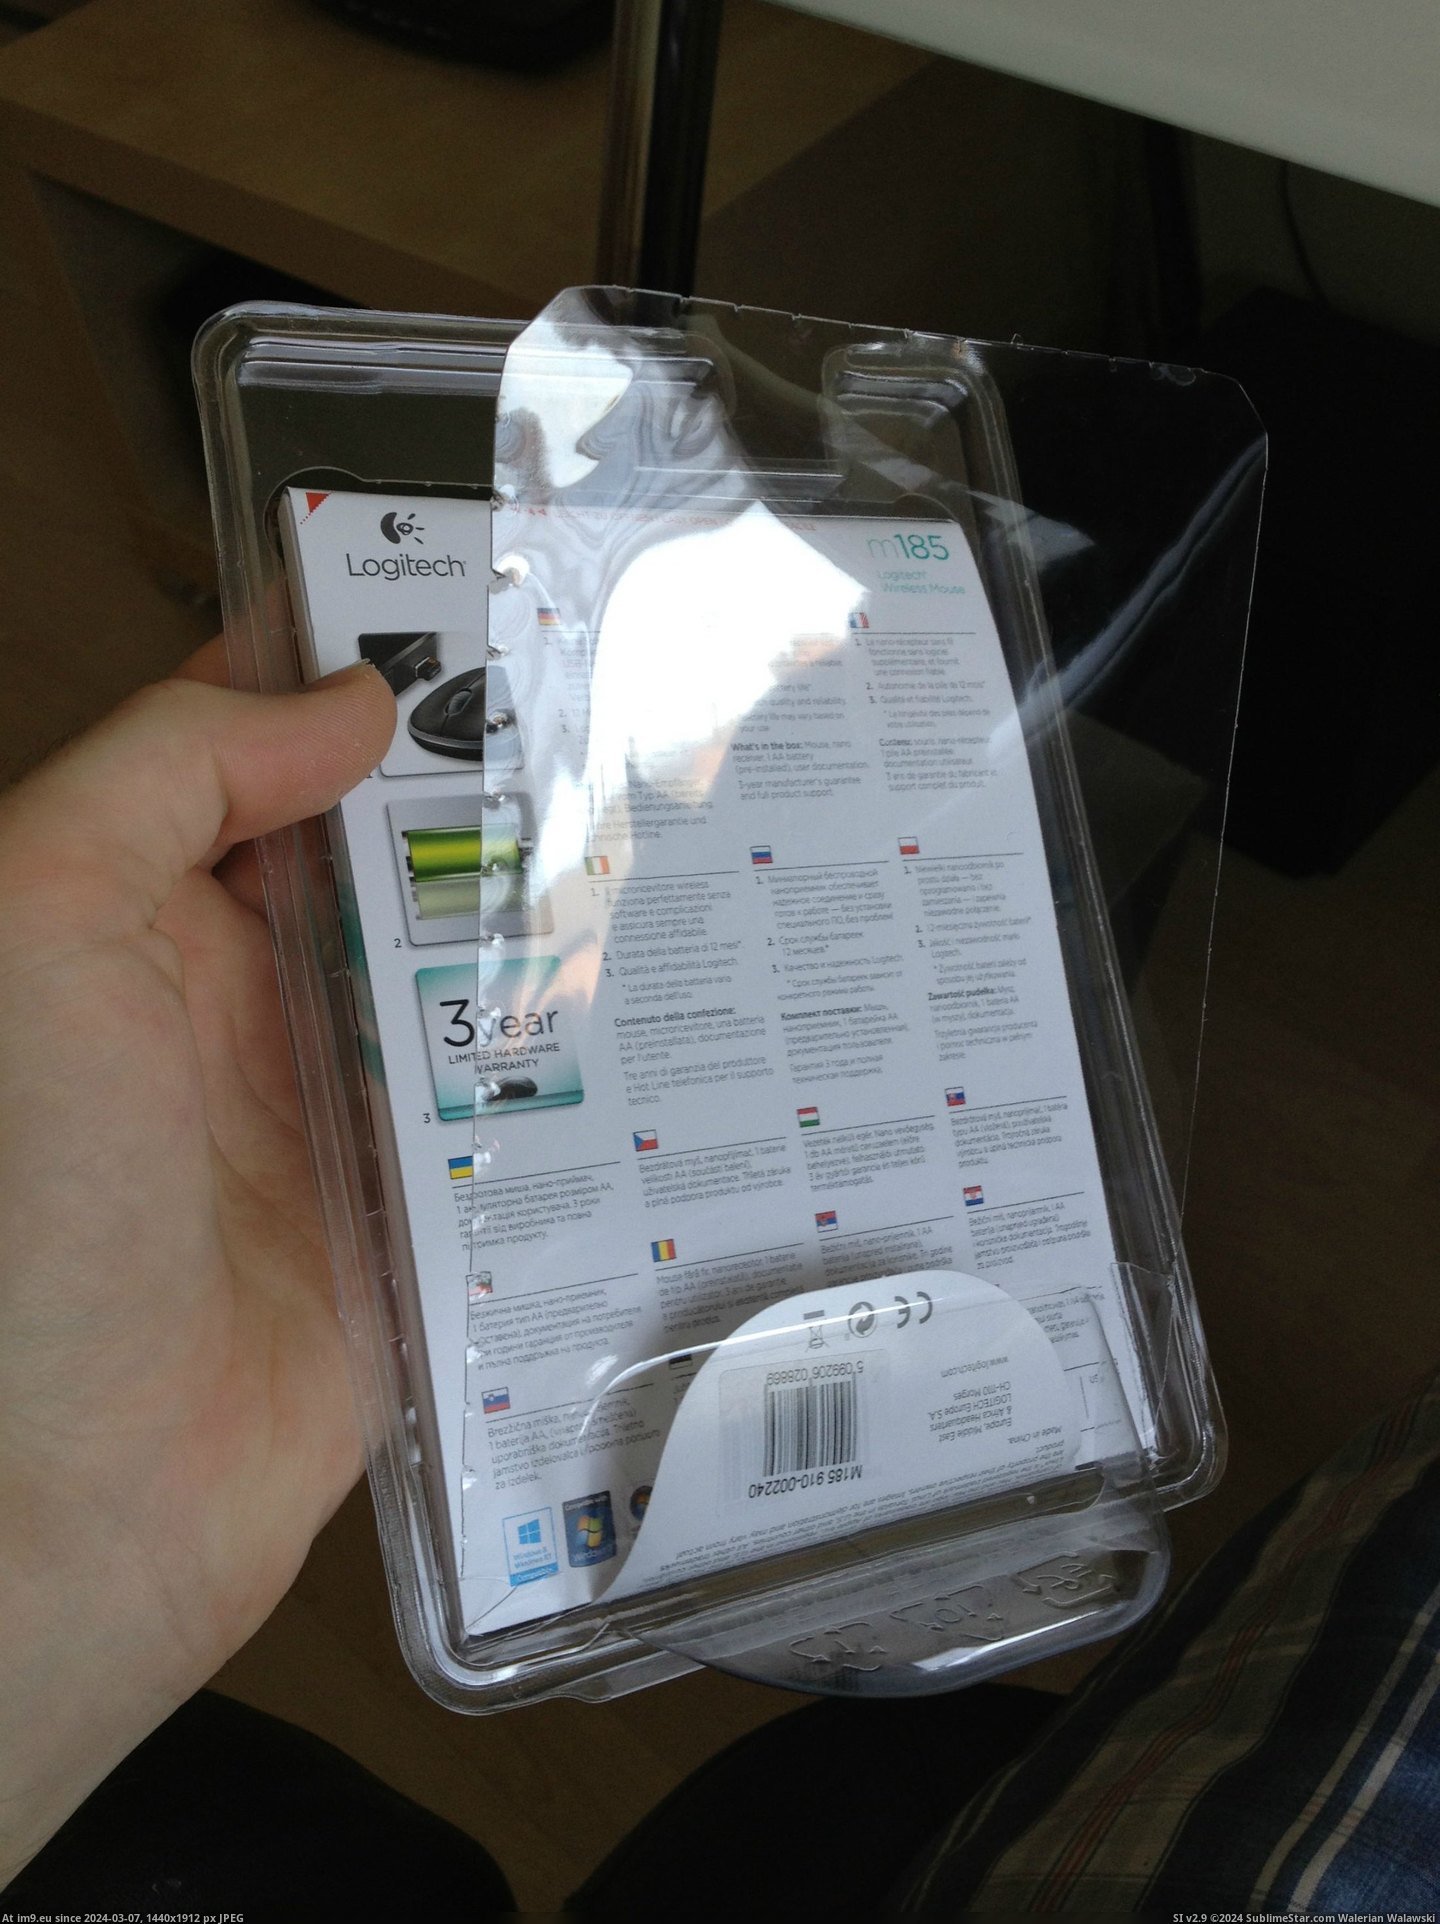 #Box #Line #Easy #Perforated #Logitech #Opening #Packaging #Blister [Mildlyinteresting] This blister packaging by Logitech has a perforated line for easy opening of the box. Pic. (Image of album My r/MILDLYINTERESTING favs))